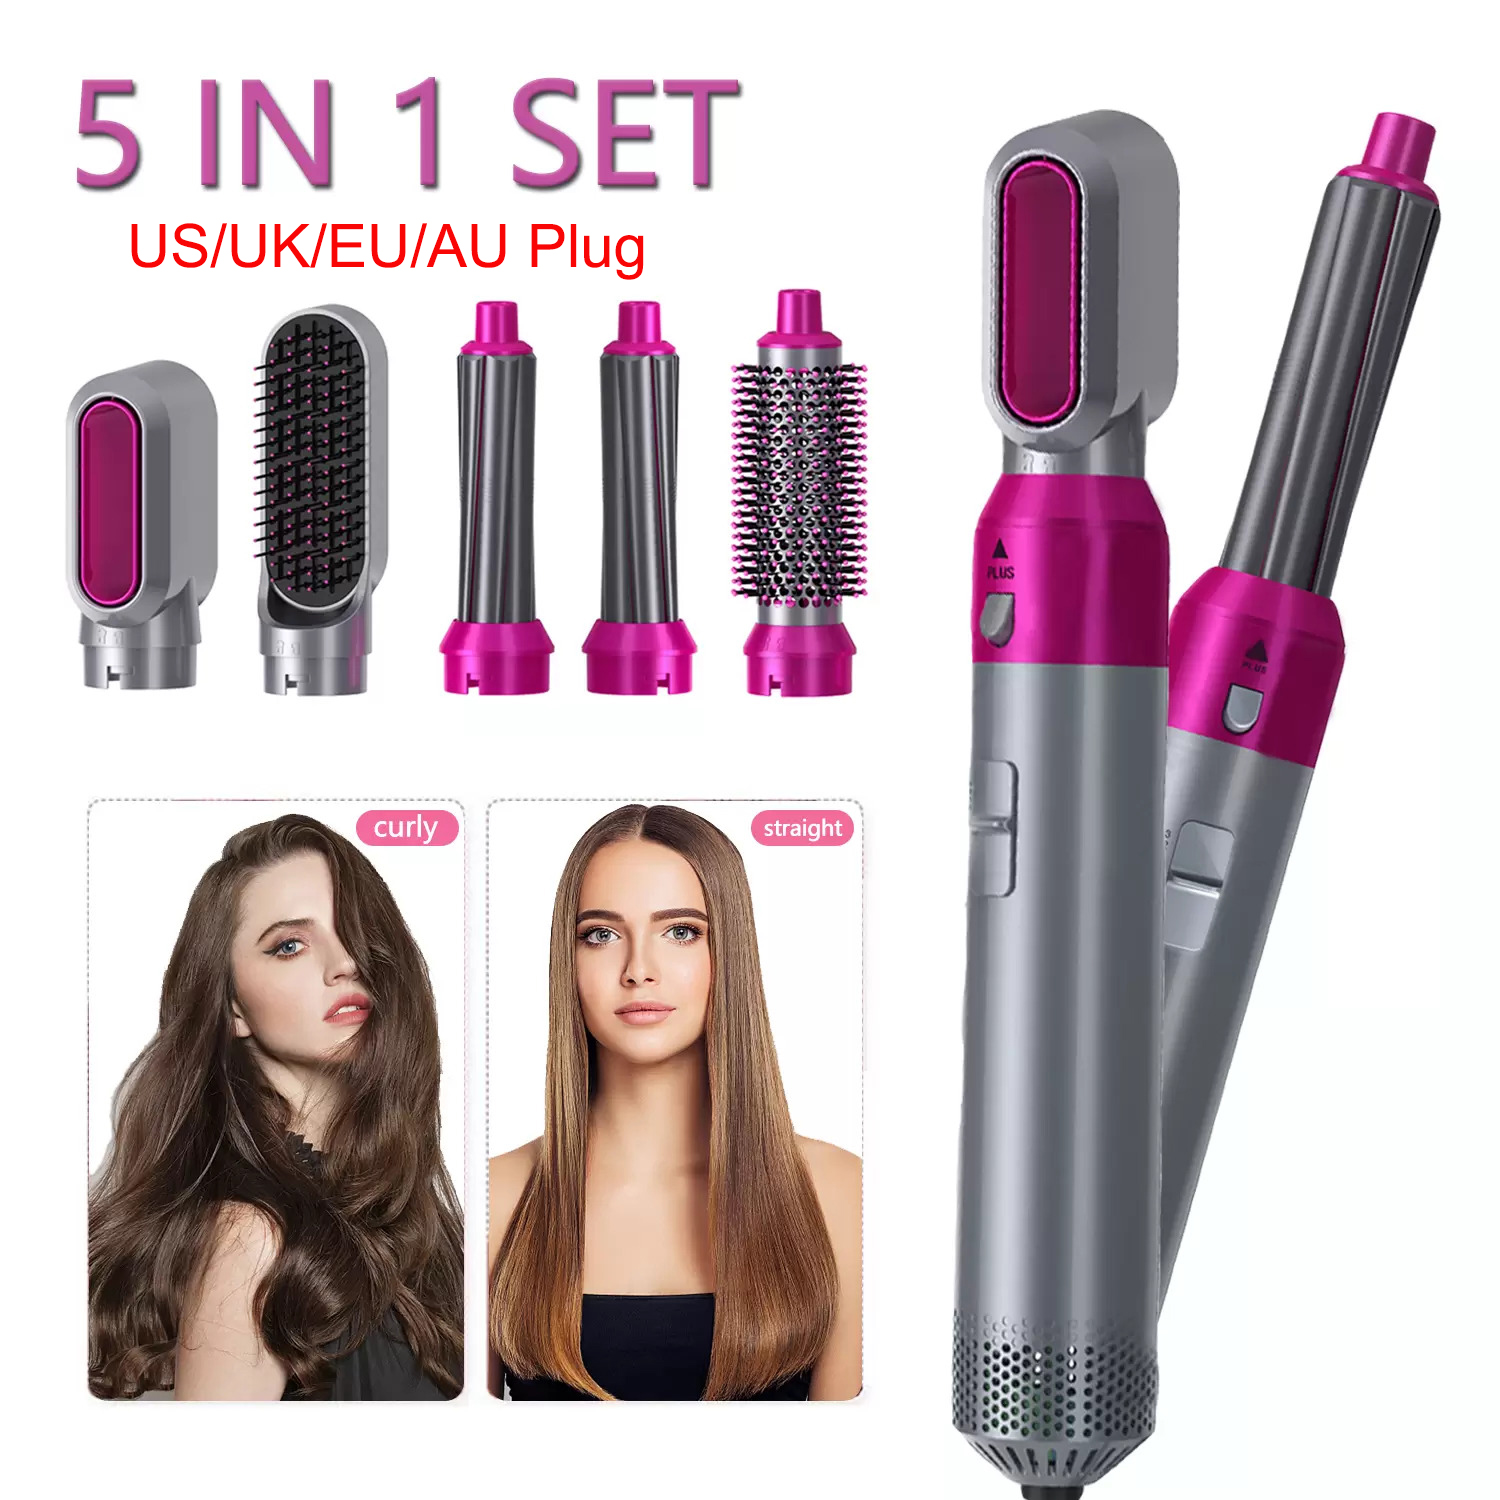 

Top Seller Air Wrap 5 in 1 Professional Hair Dryer Brush Automatic Curling Iron Hair Straightener Hot Comb Styling Tools Blow Home Curler